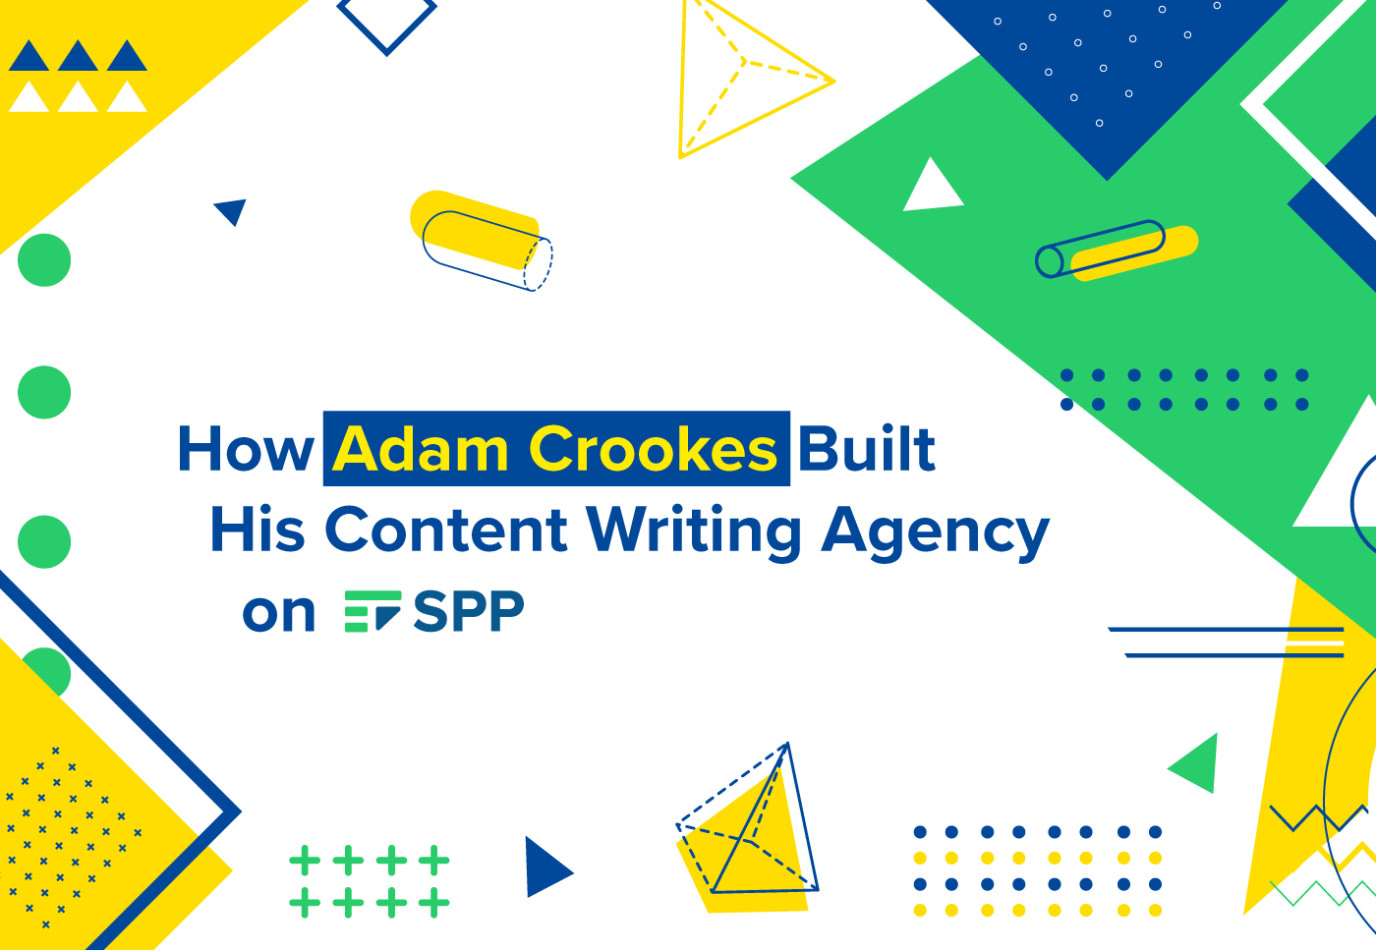 How Adam Crookes Built His Content Writing Agency on SPP